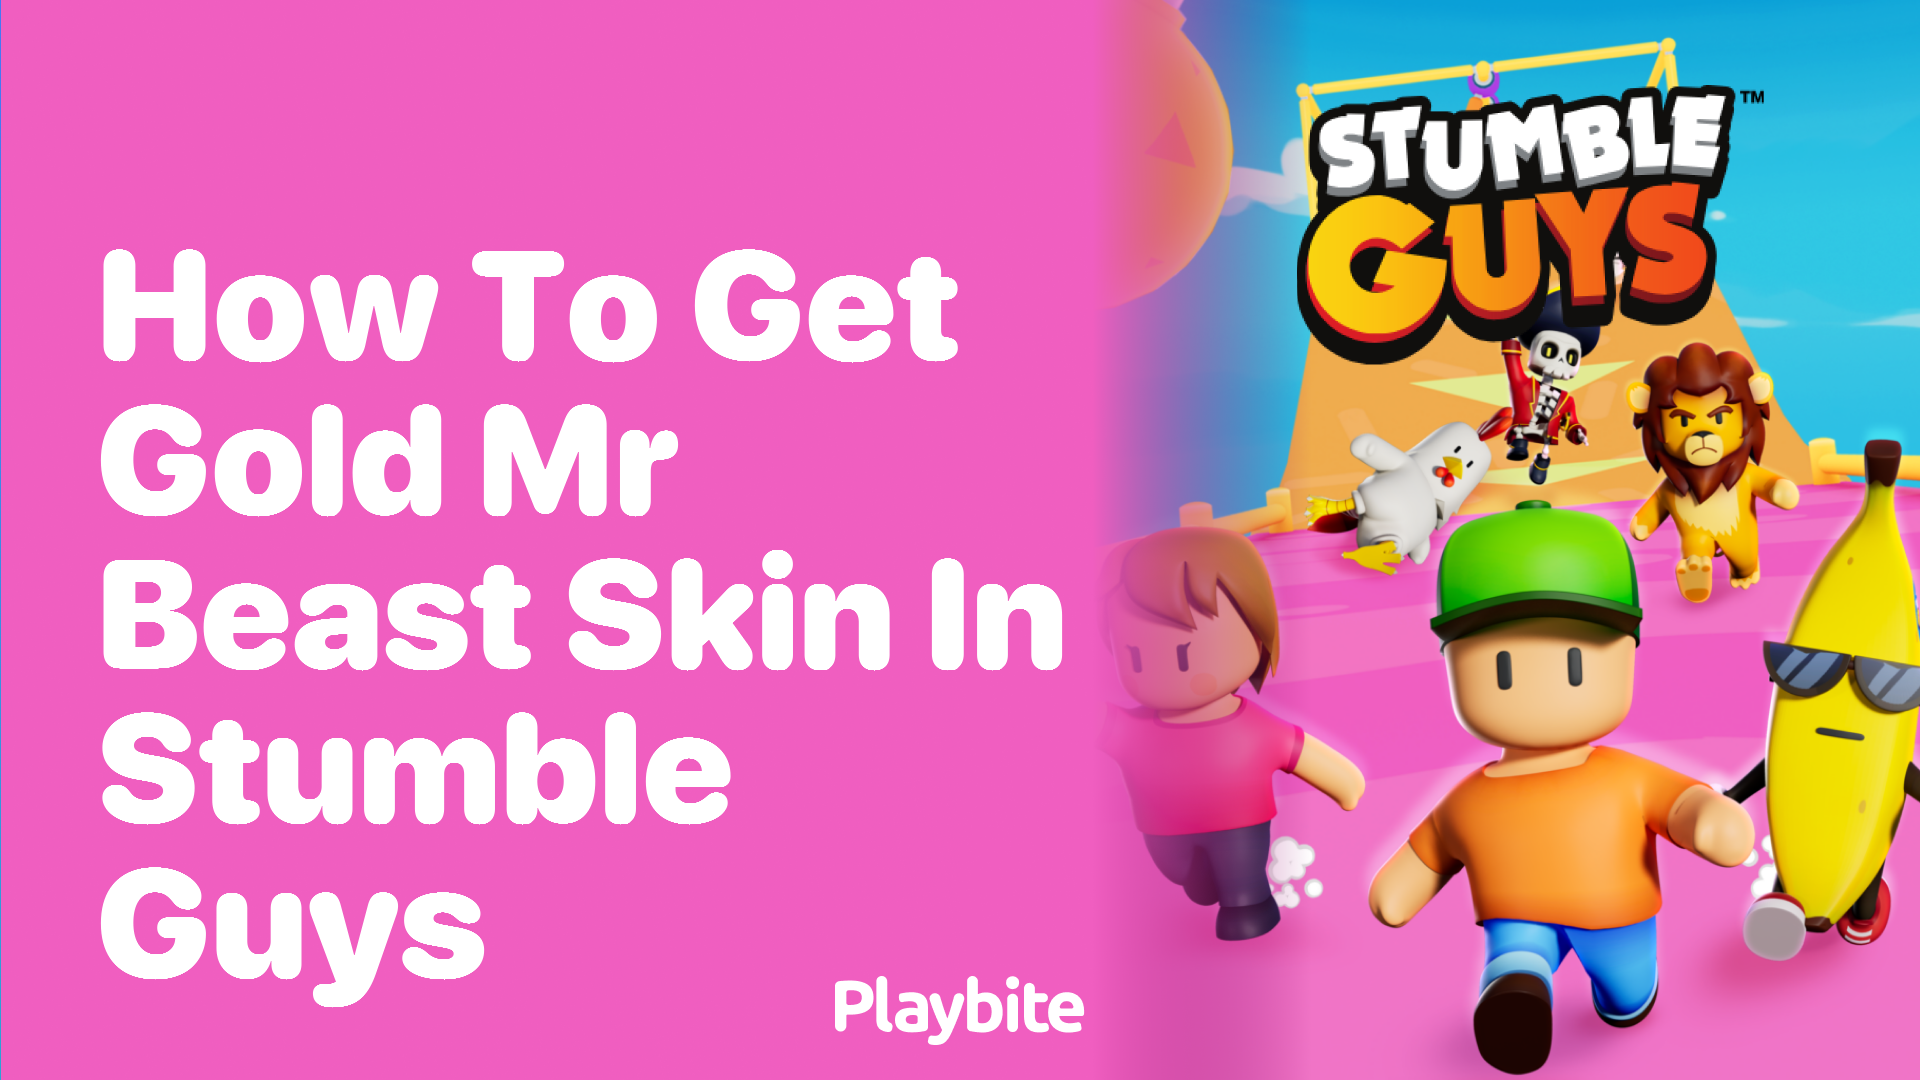 How to Get the Gold Mr. Beast Skin in Stumble Guys